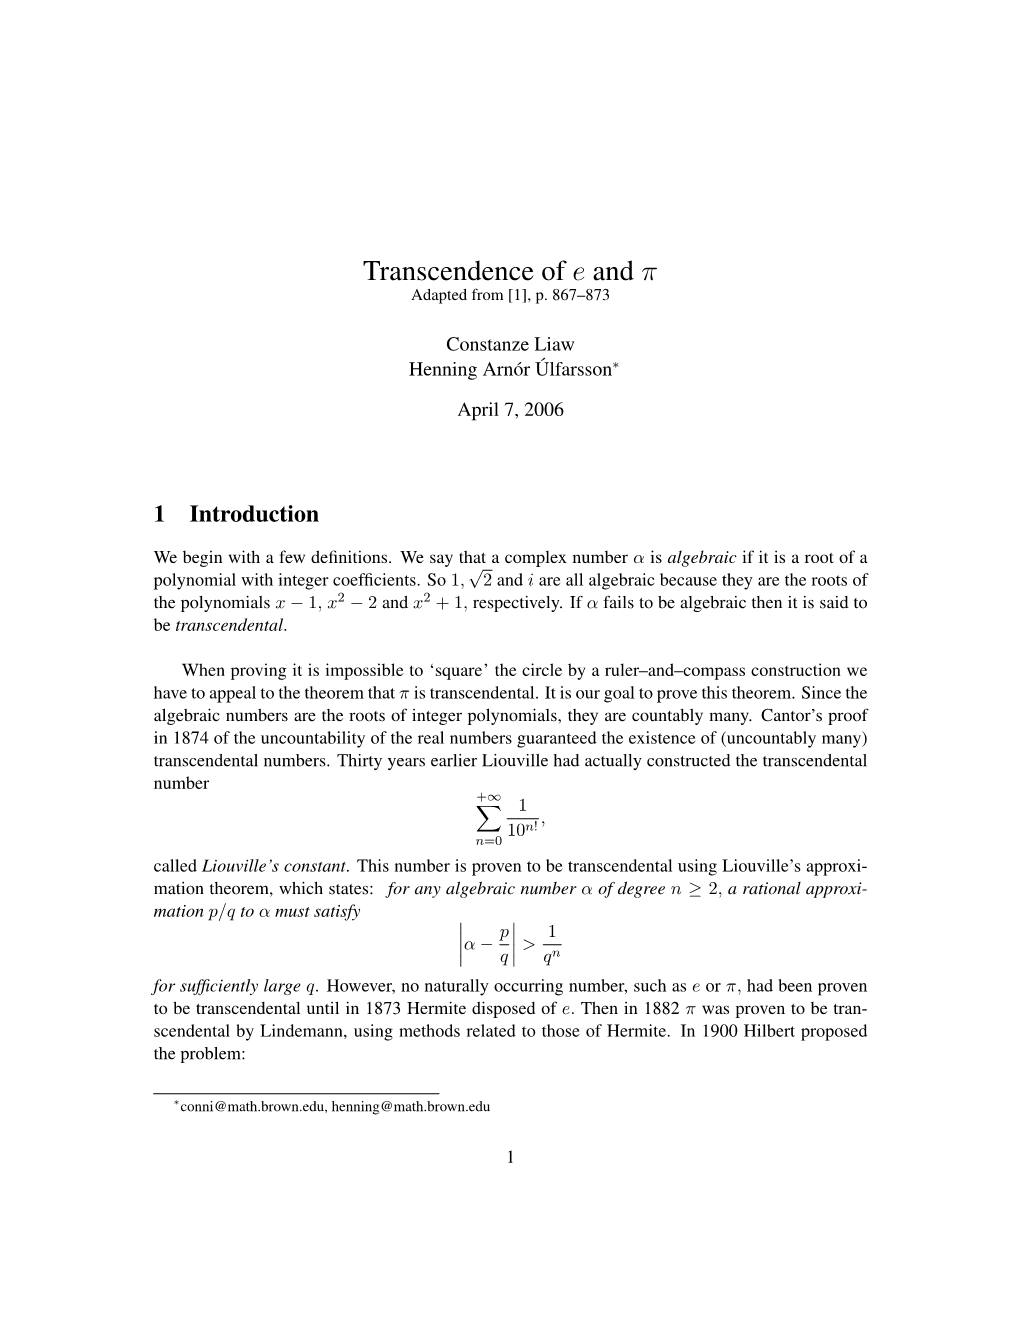 Transcendence of E and Π Adapted from [1], P